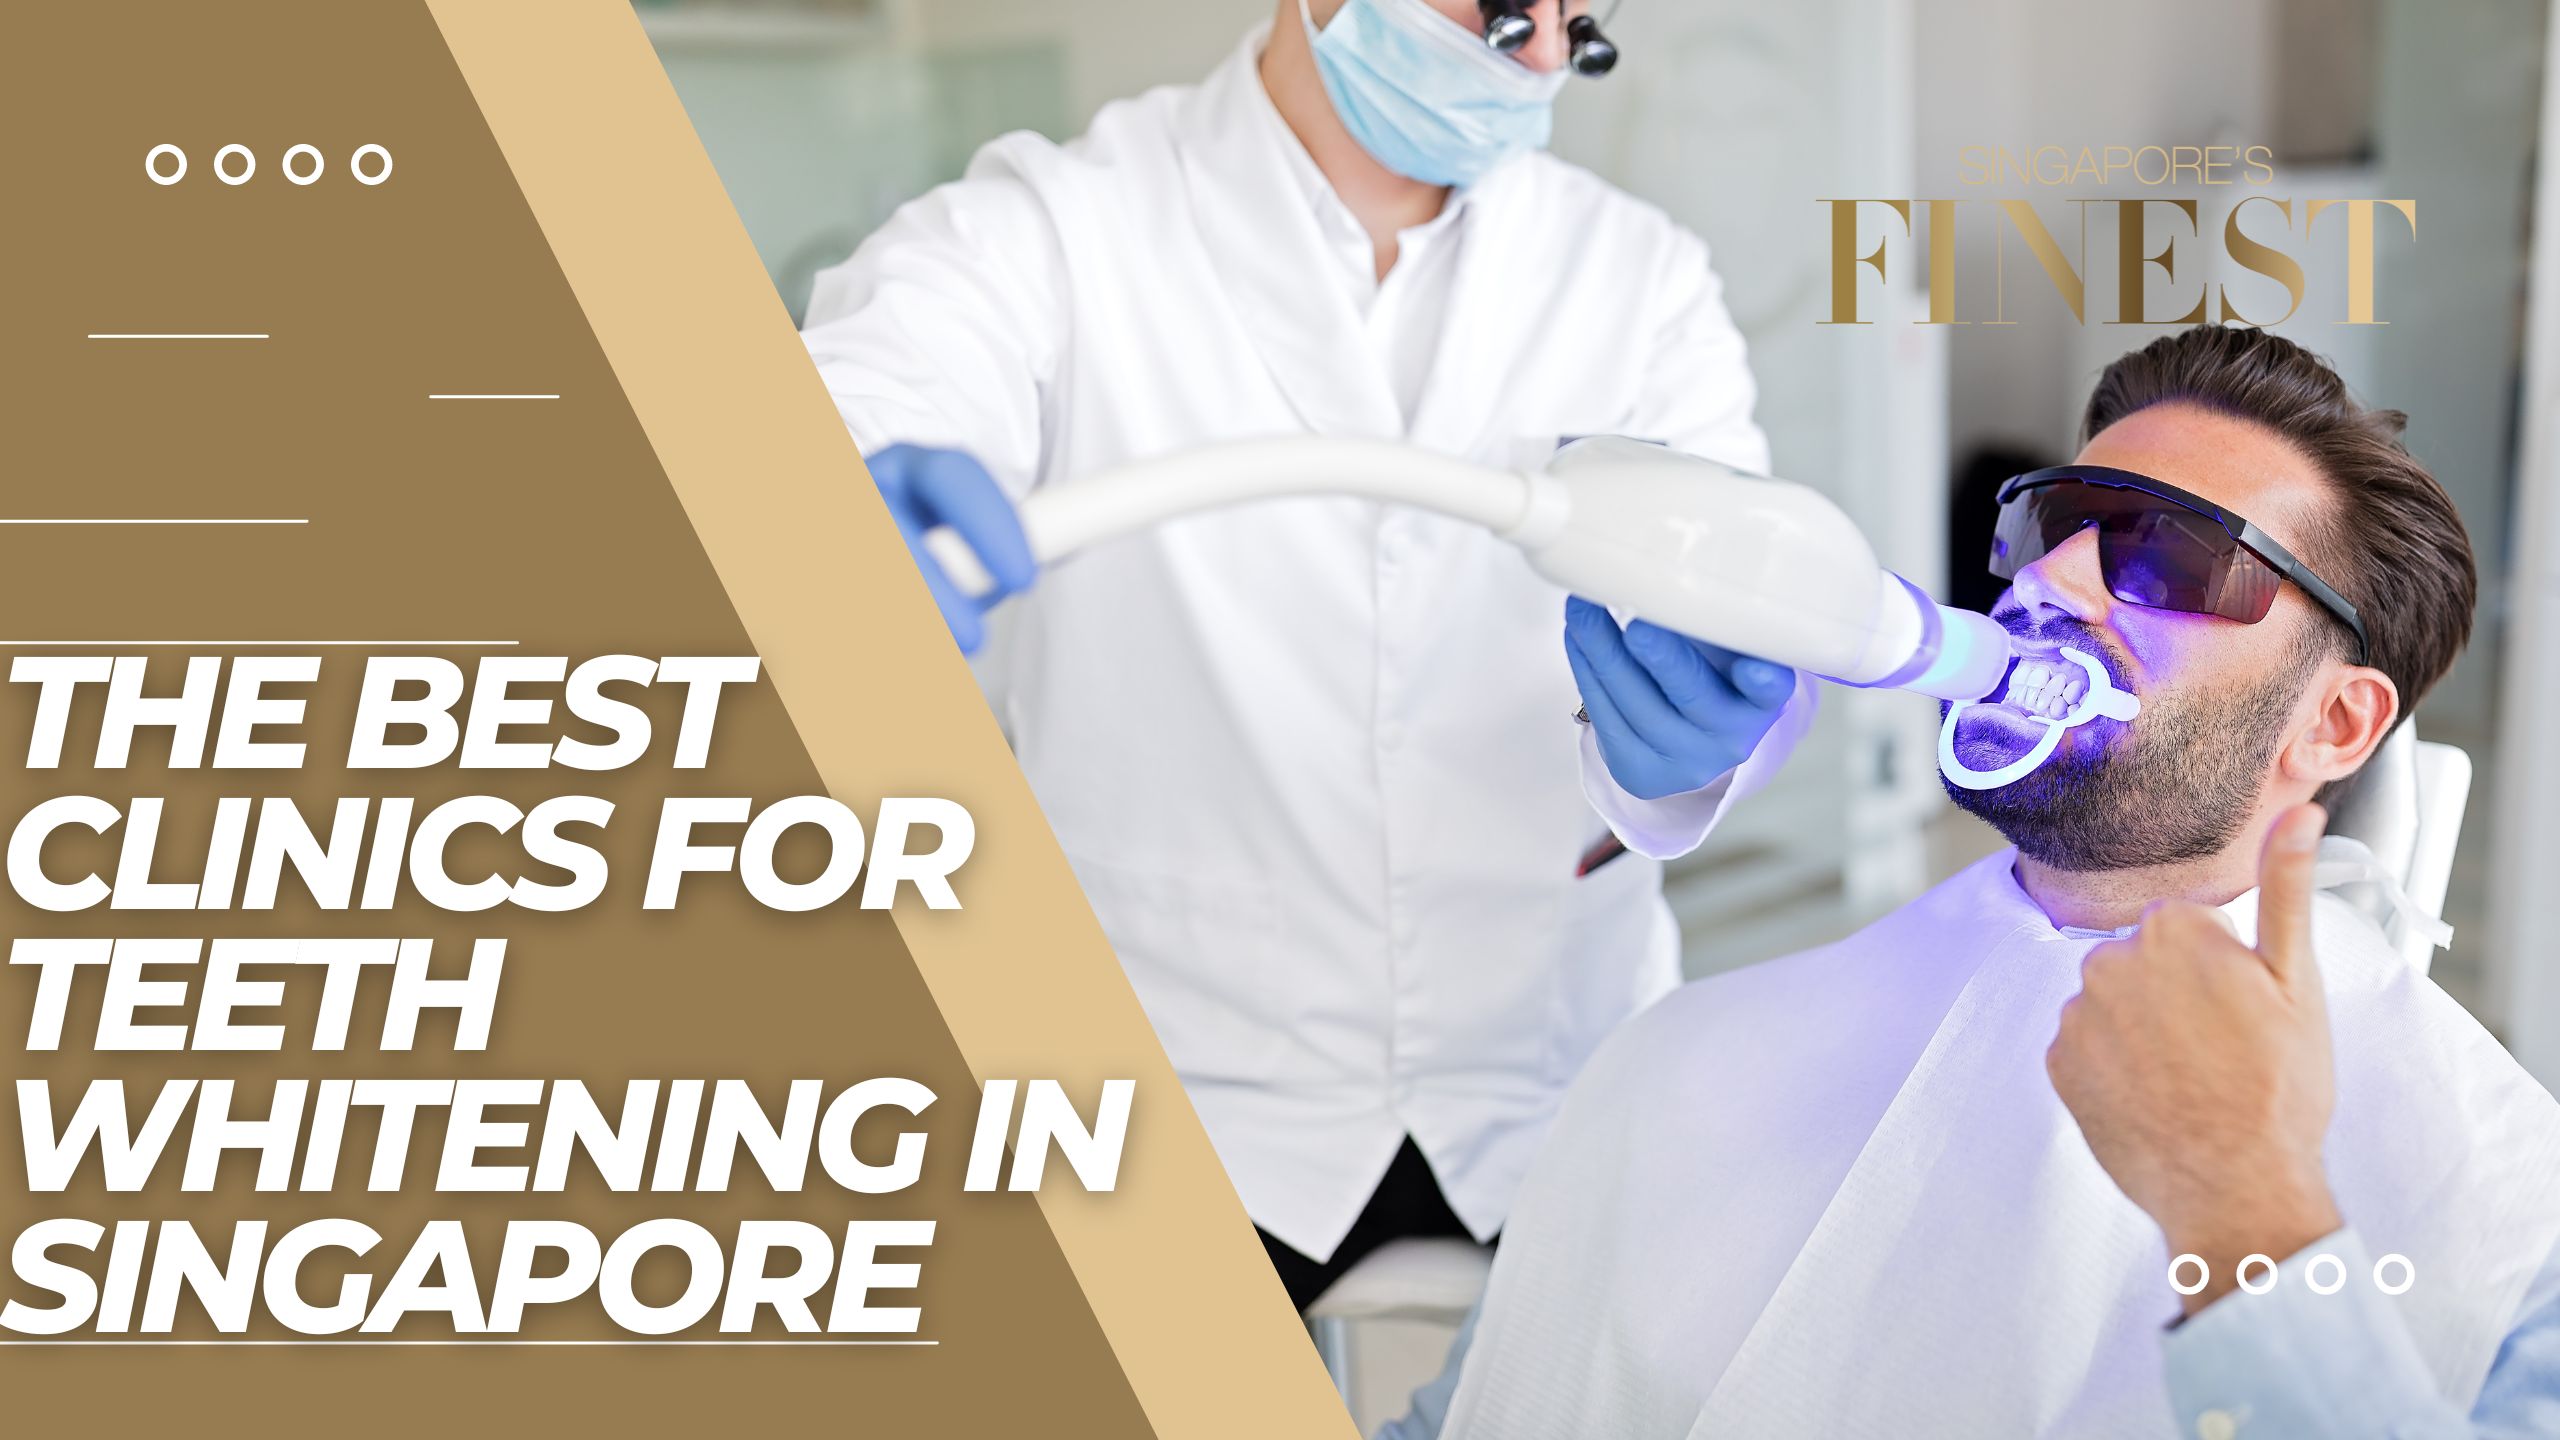 The Finest Clinics For Best Teeth Whitening in Singapore